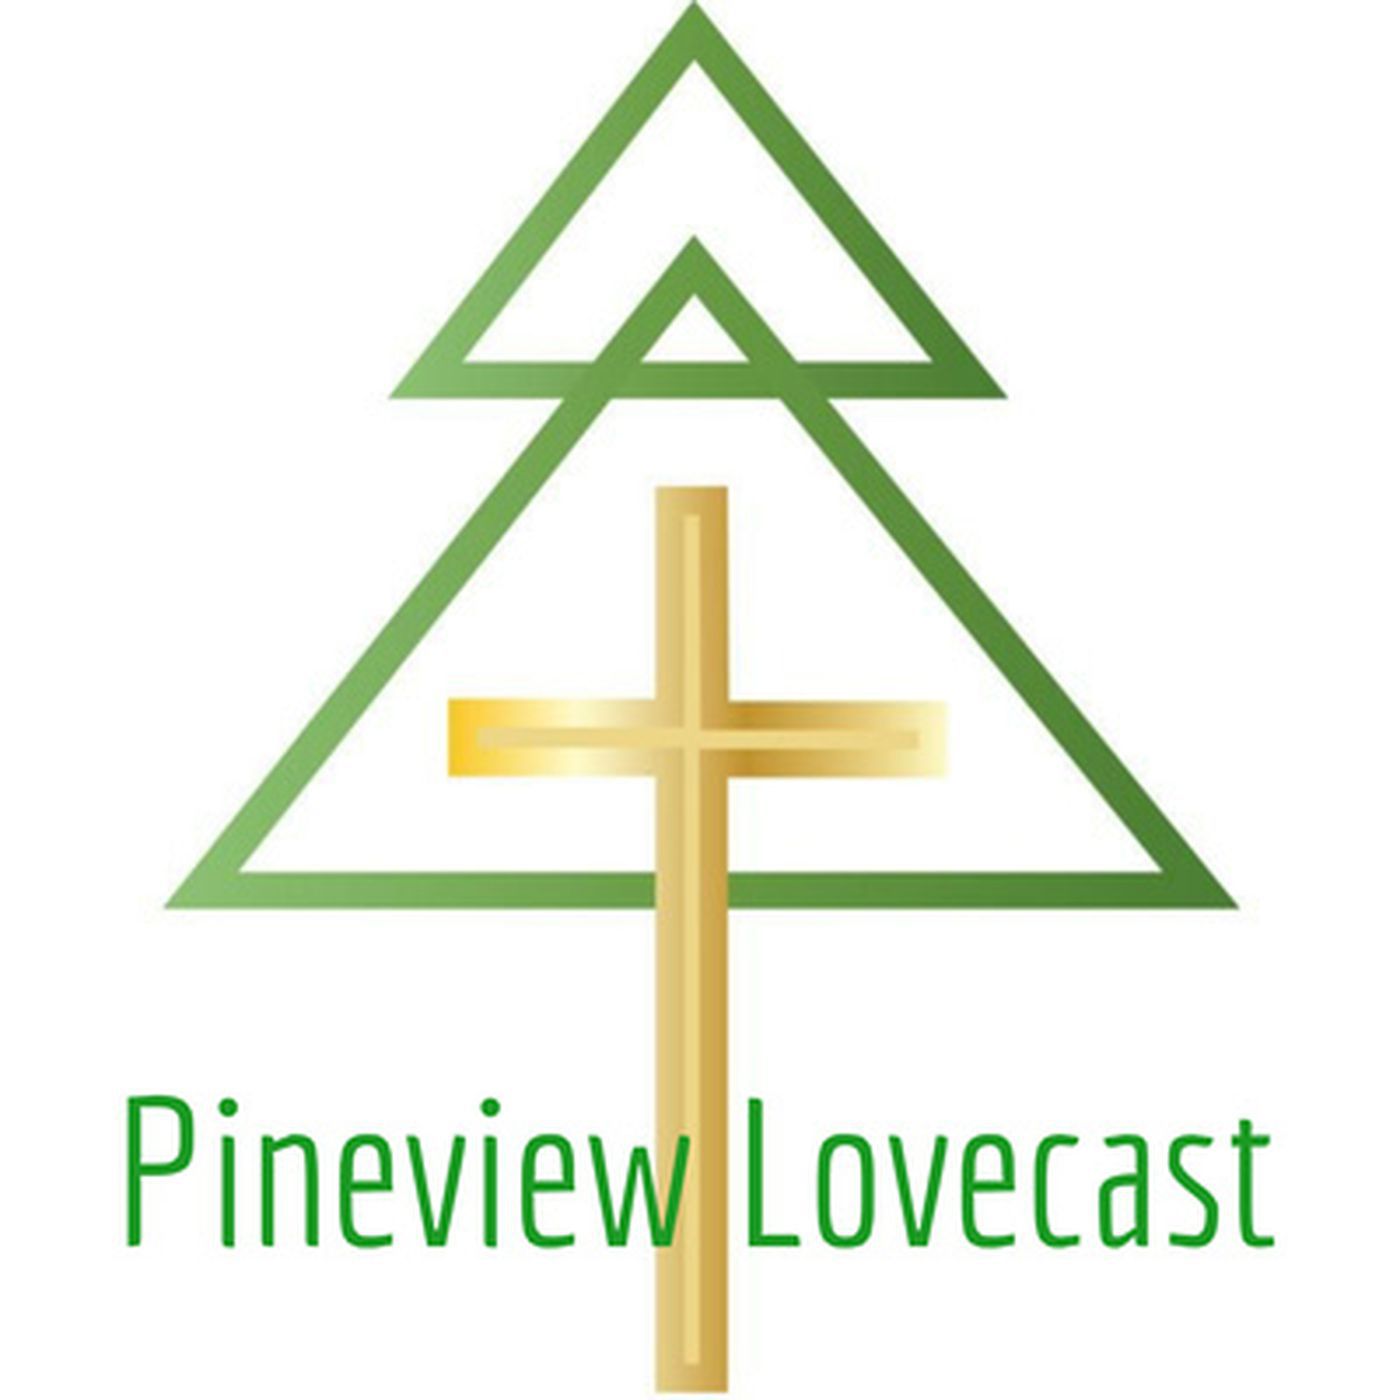 Pineview Lovecast